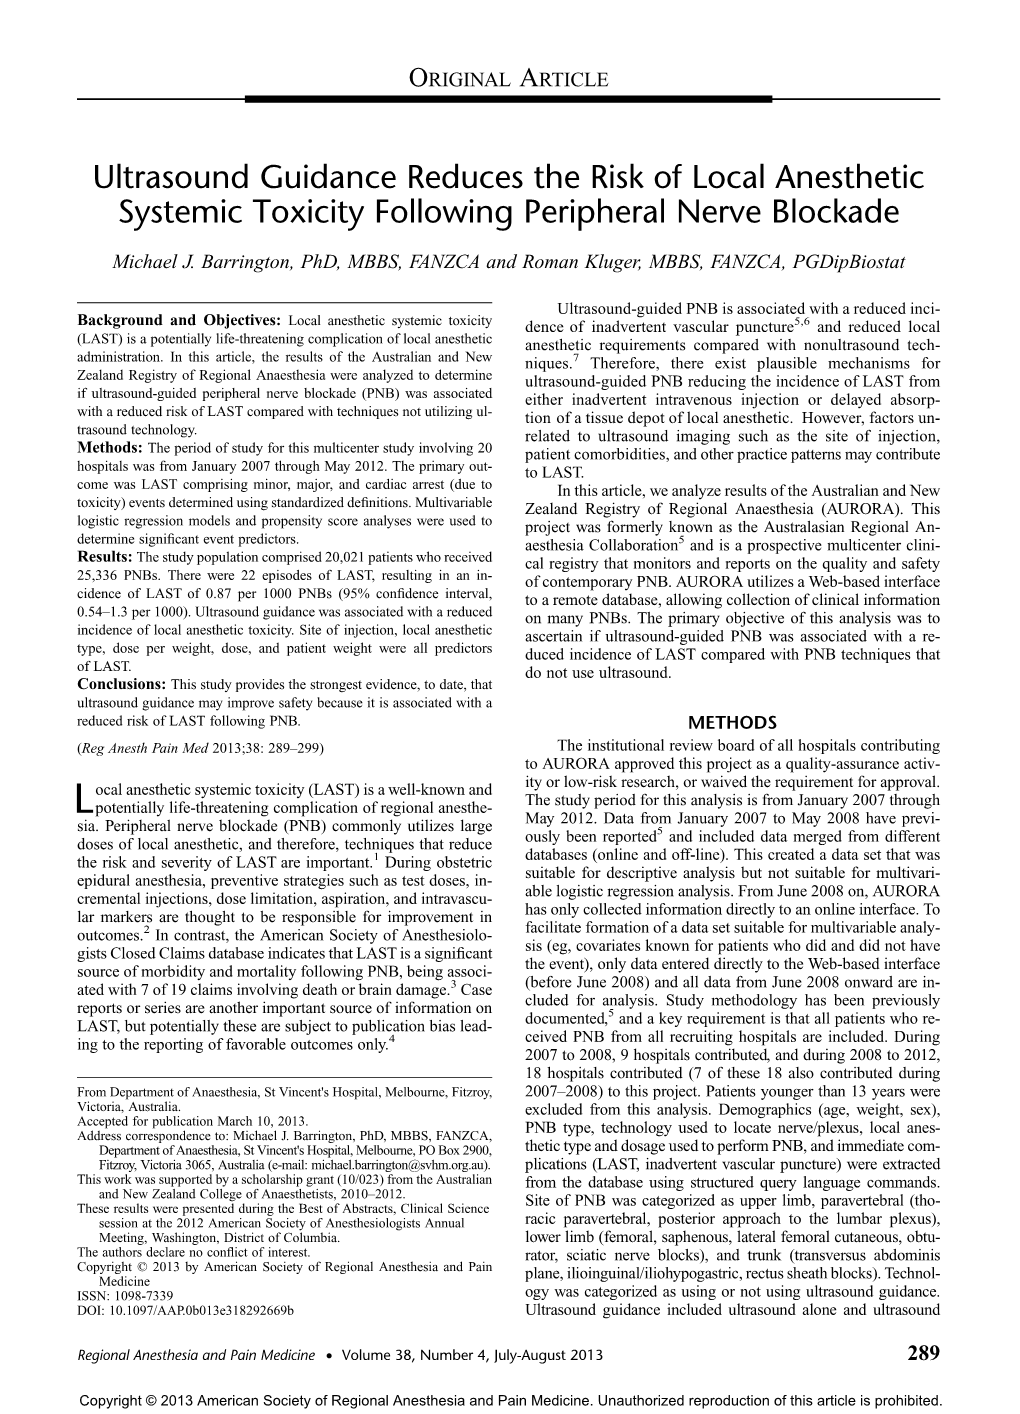 Ultrasound Guidance Reduces the Risk of Local Anesthetic Systemic Toxicity Following Peripheral Nerve Blockade